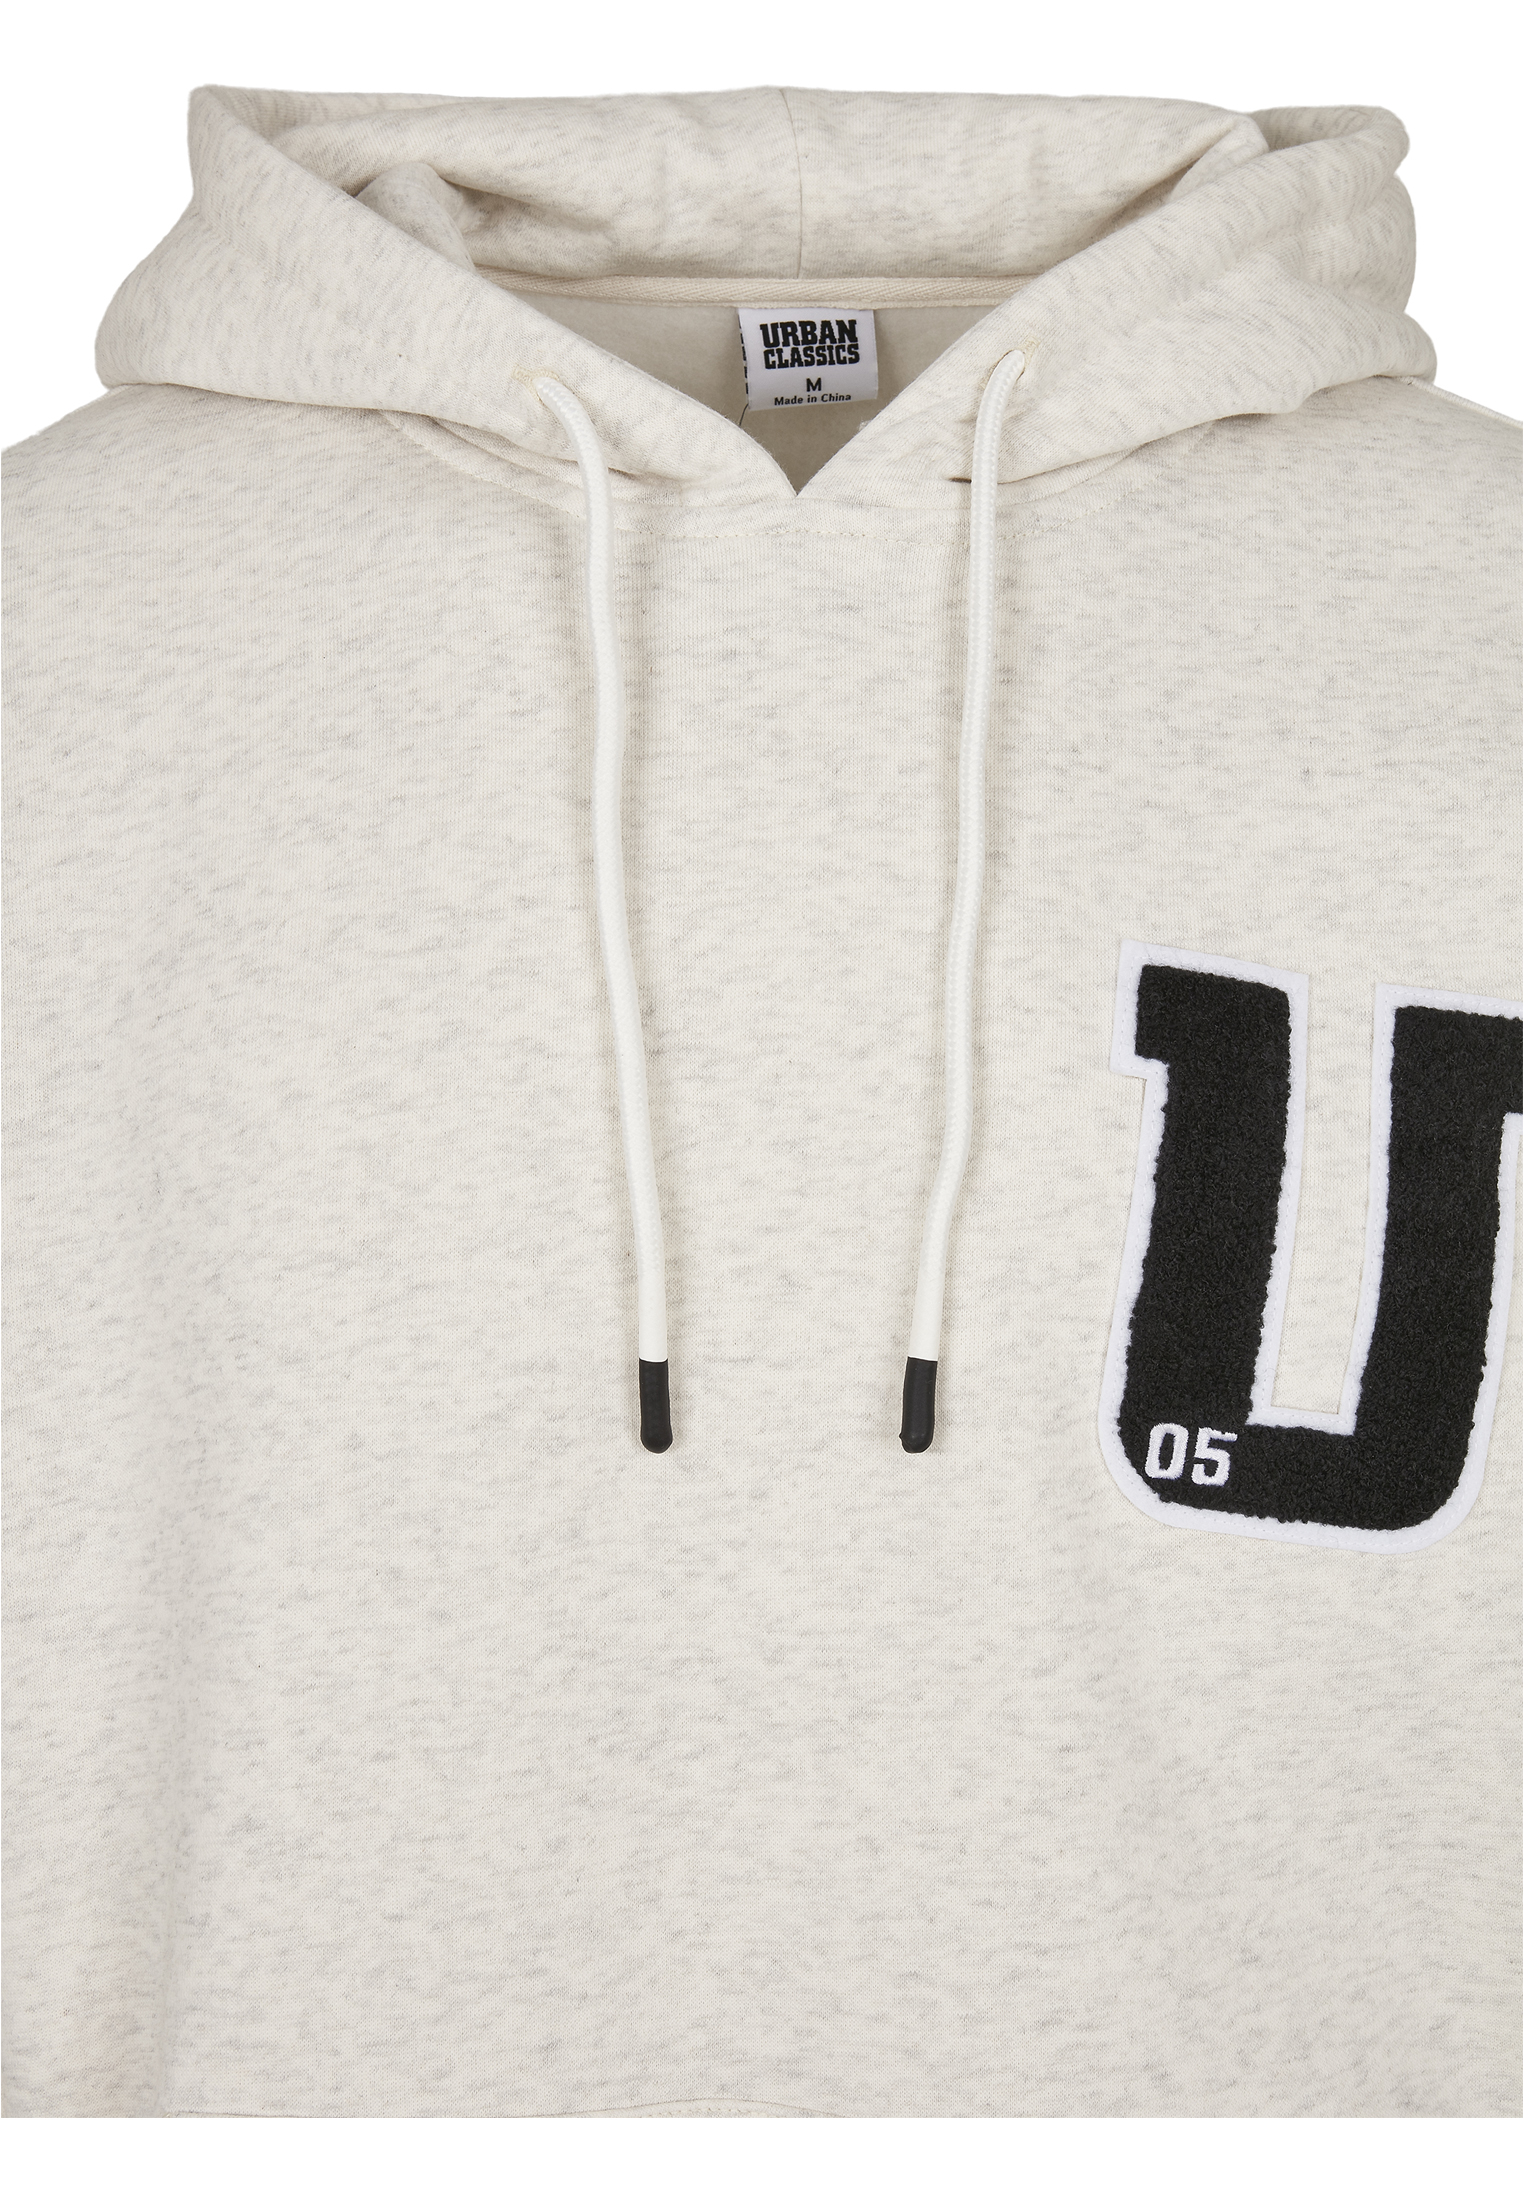 Hoodies Oversized Frottee Patch Hoody in Farbe lightgrey